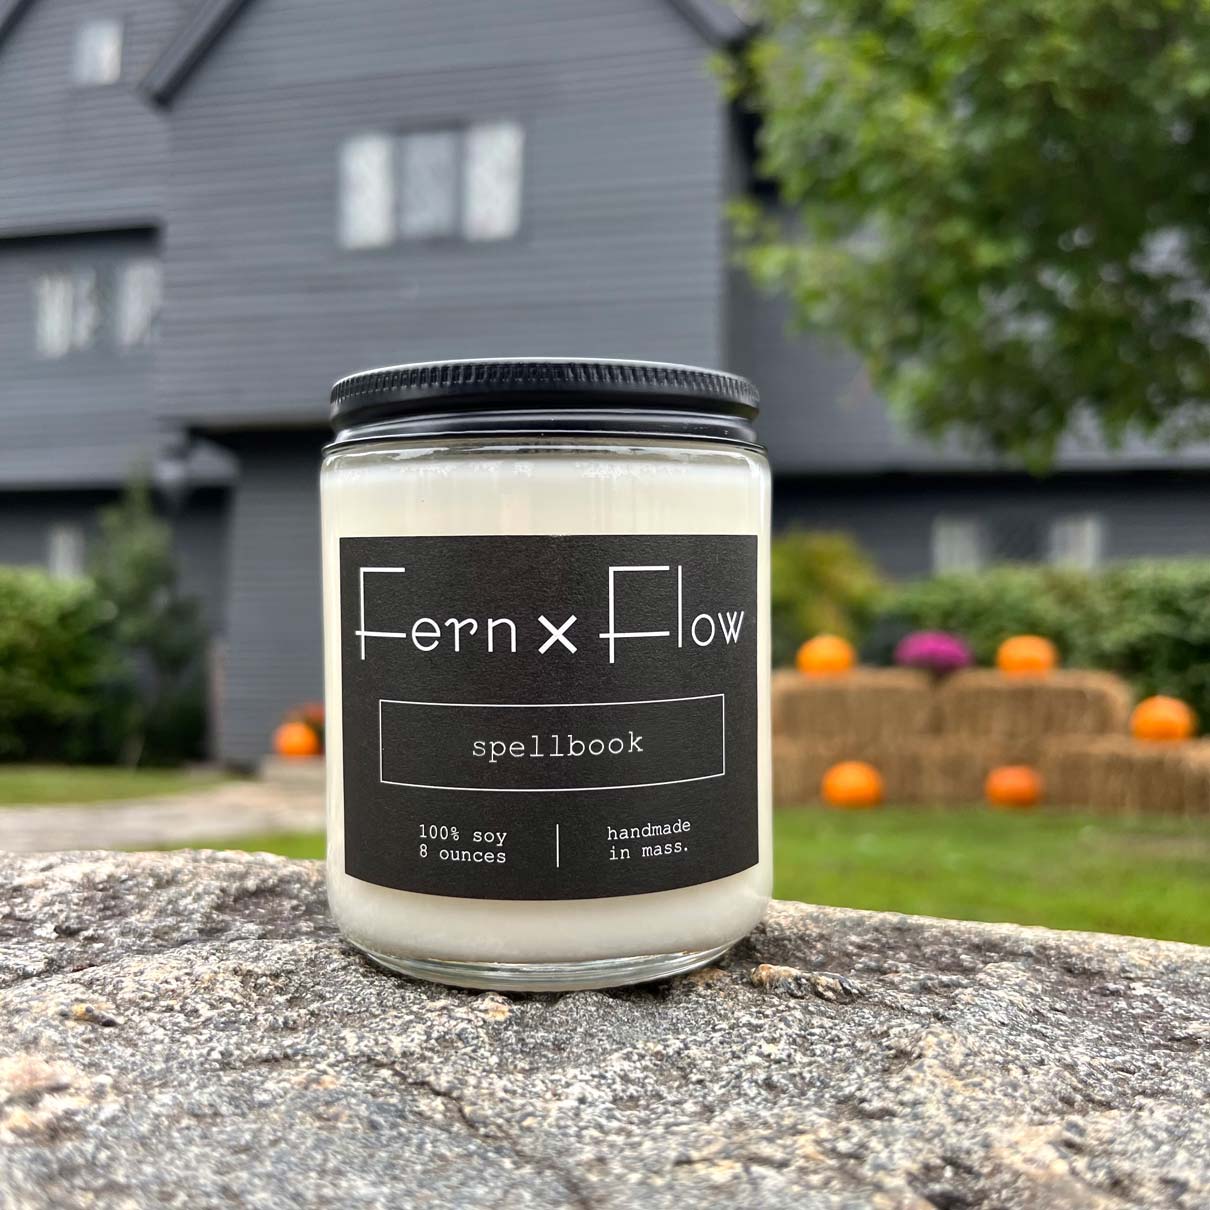 Fern x Flow Spellbook Halloween soy candle with a black and white label in front of The Salem Witch House in Salem MA